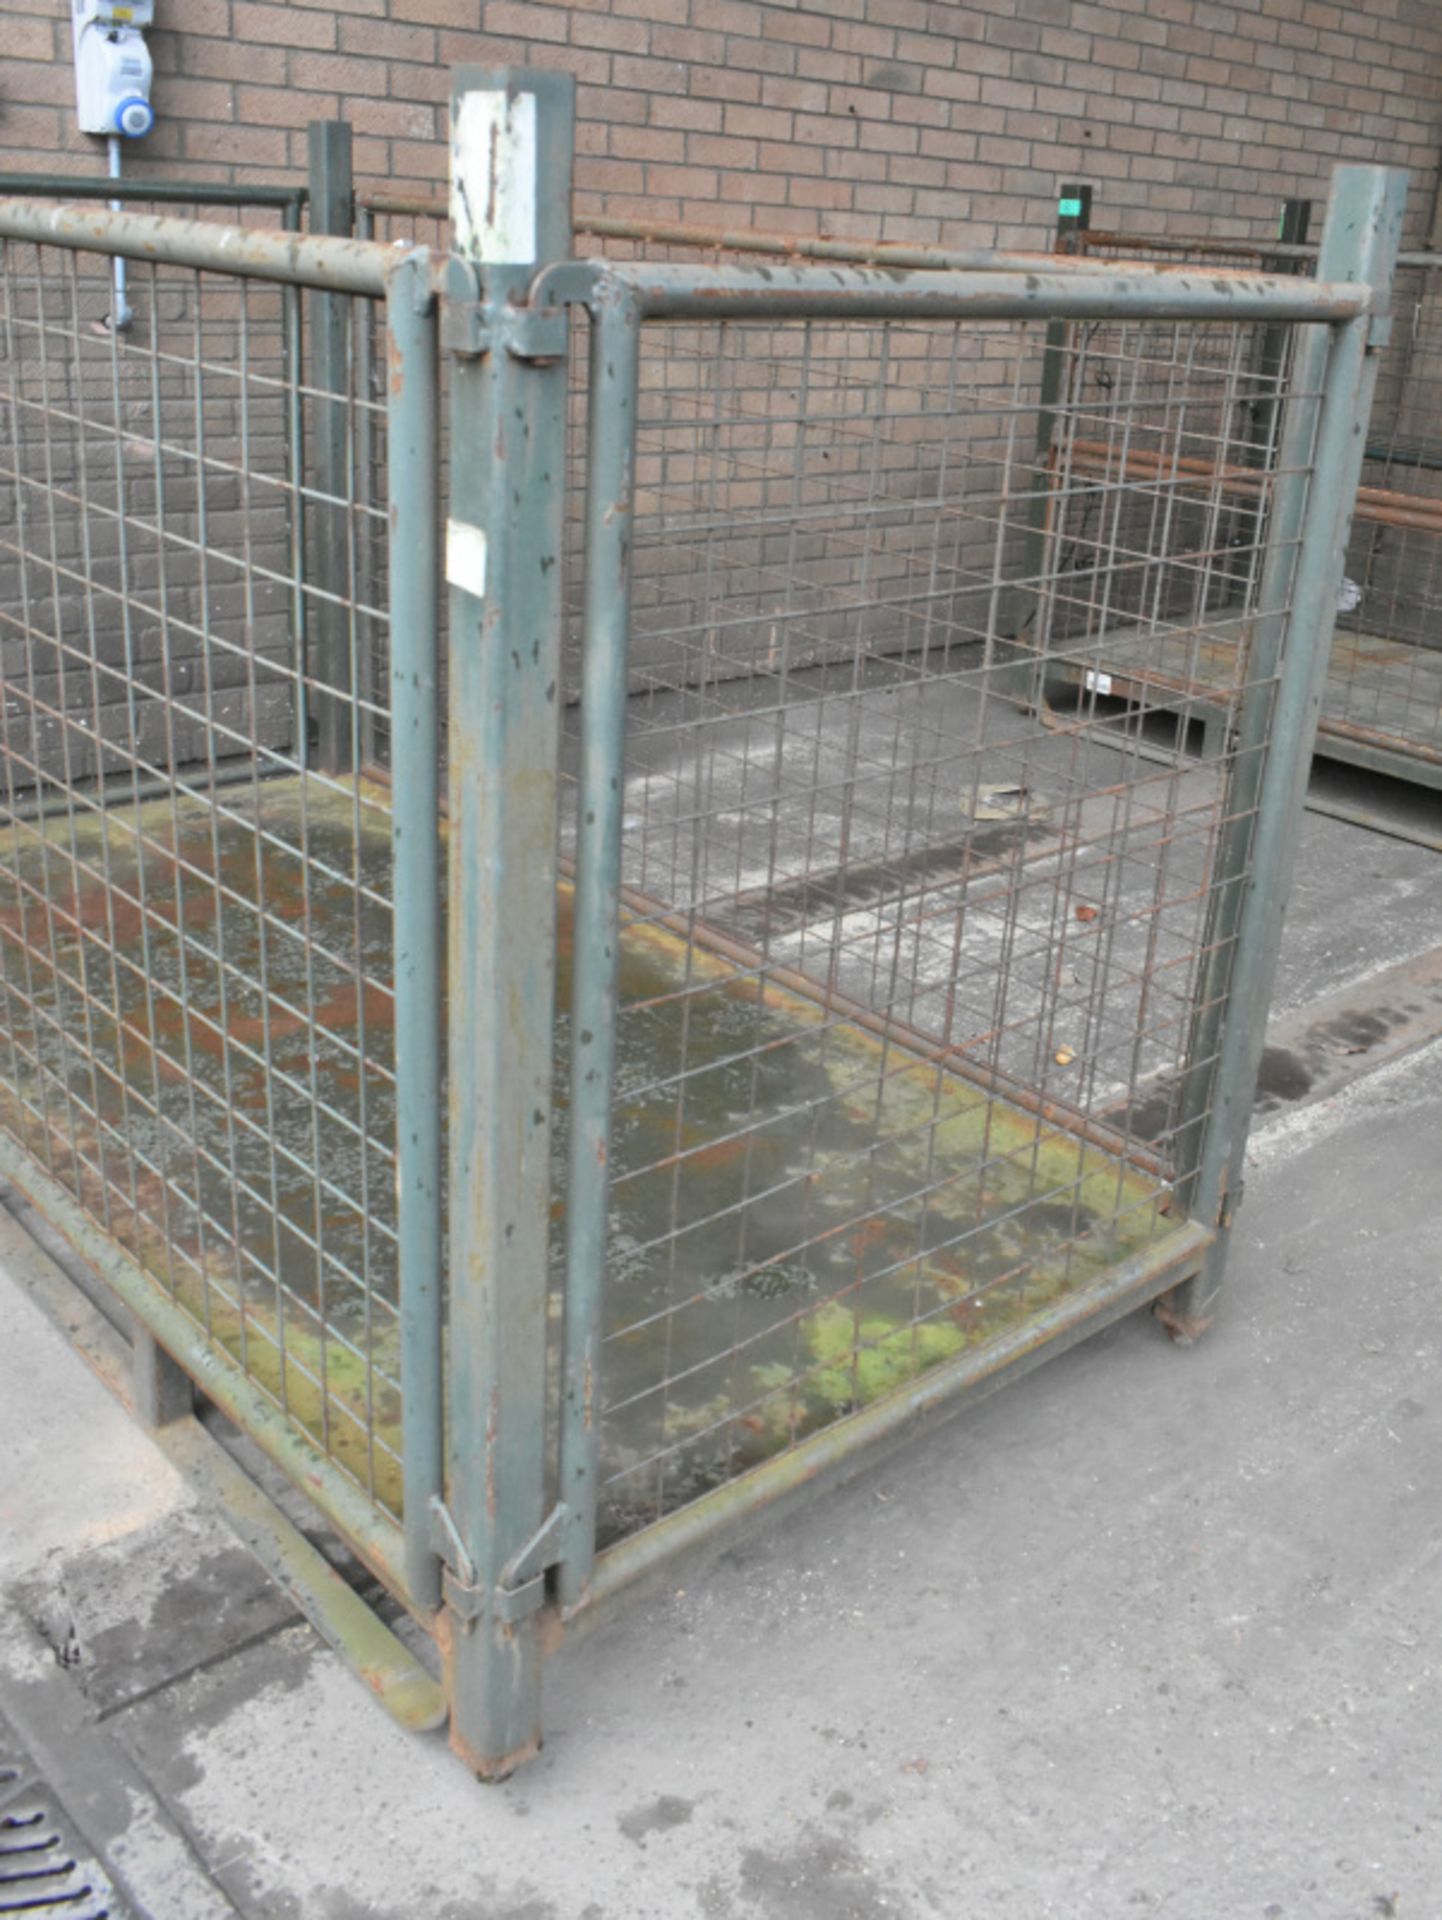 Longspan Metal Stillage - External dimensions L213 x W113 x H143cm - PLEASE SEE PICTURES FOR CONDITI - Image 2 of 3